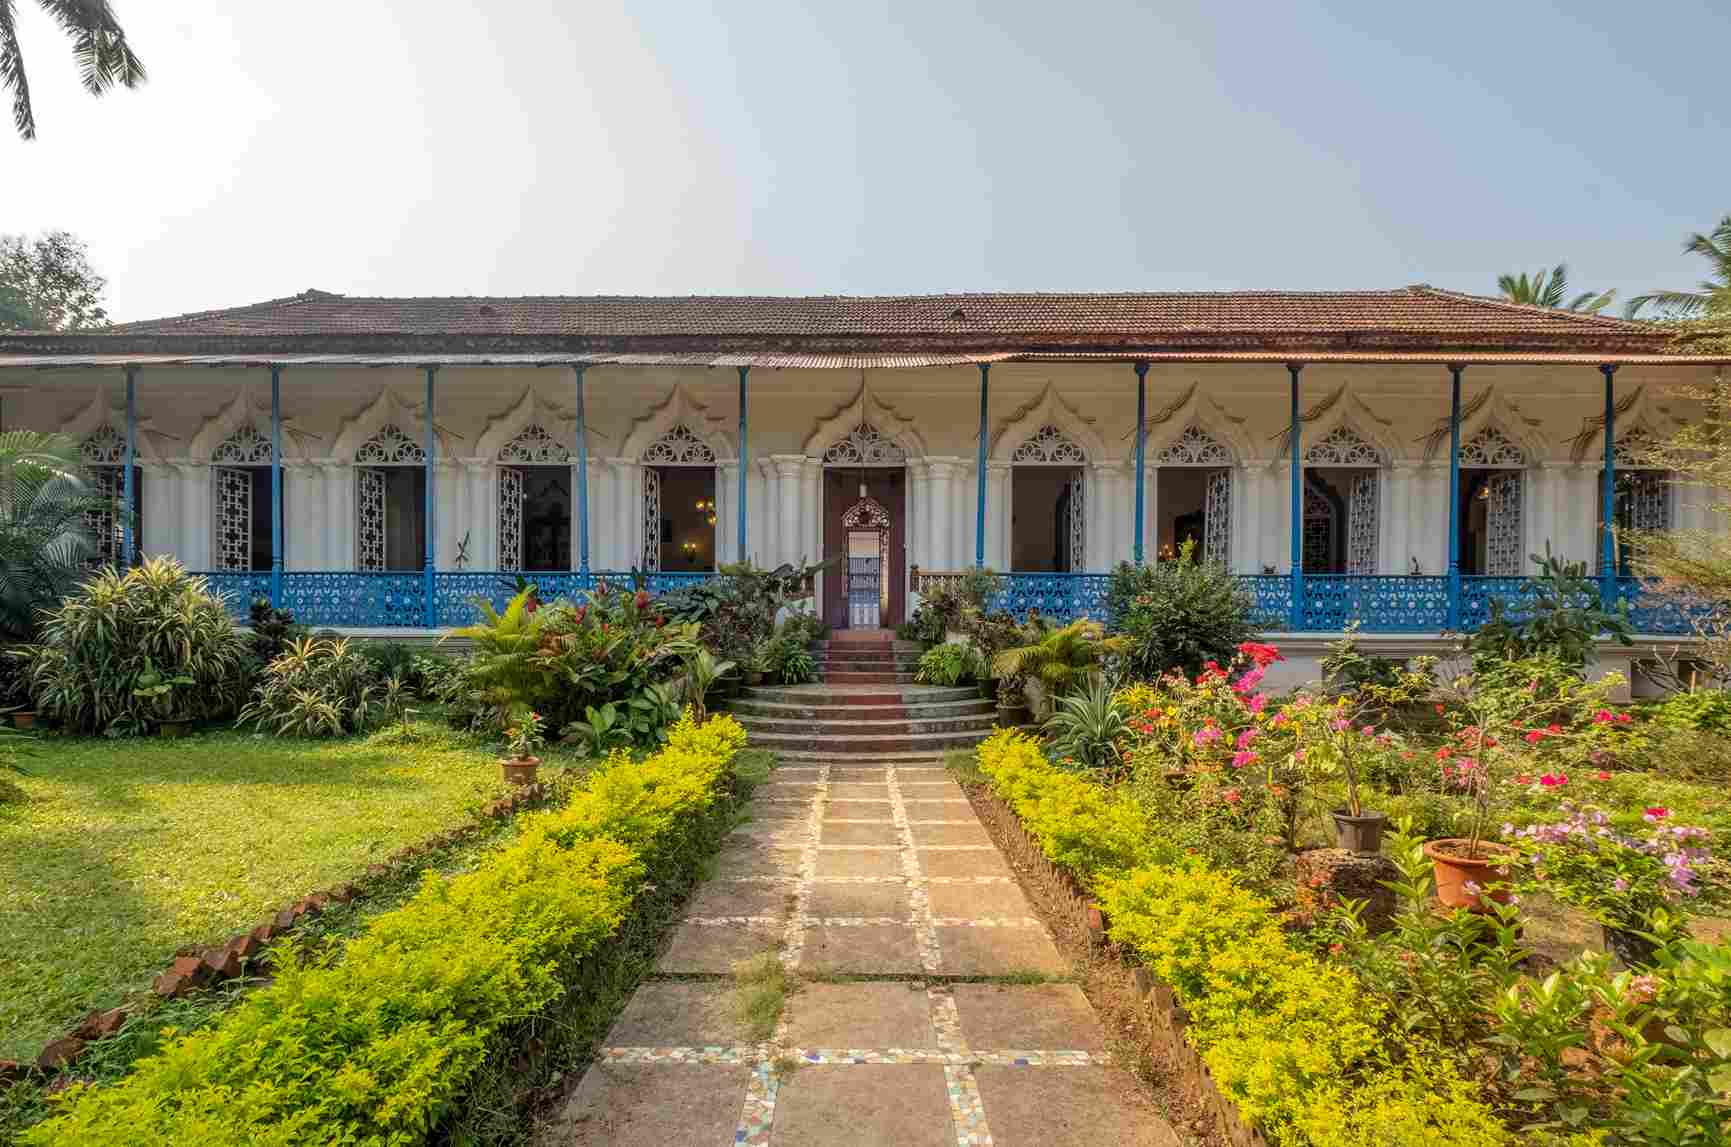 The Antao House in Goa is a beautiful property with lush gardens and a colourful facade